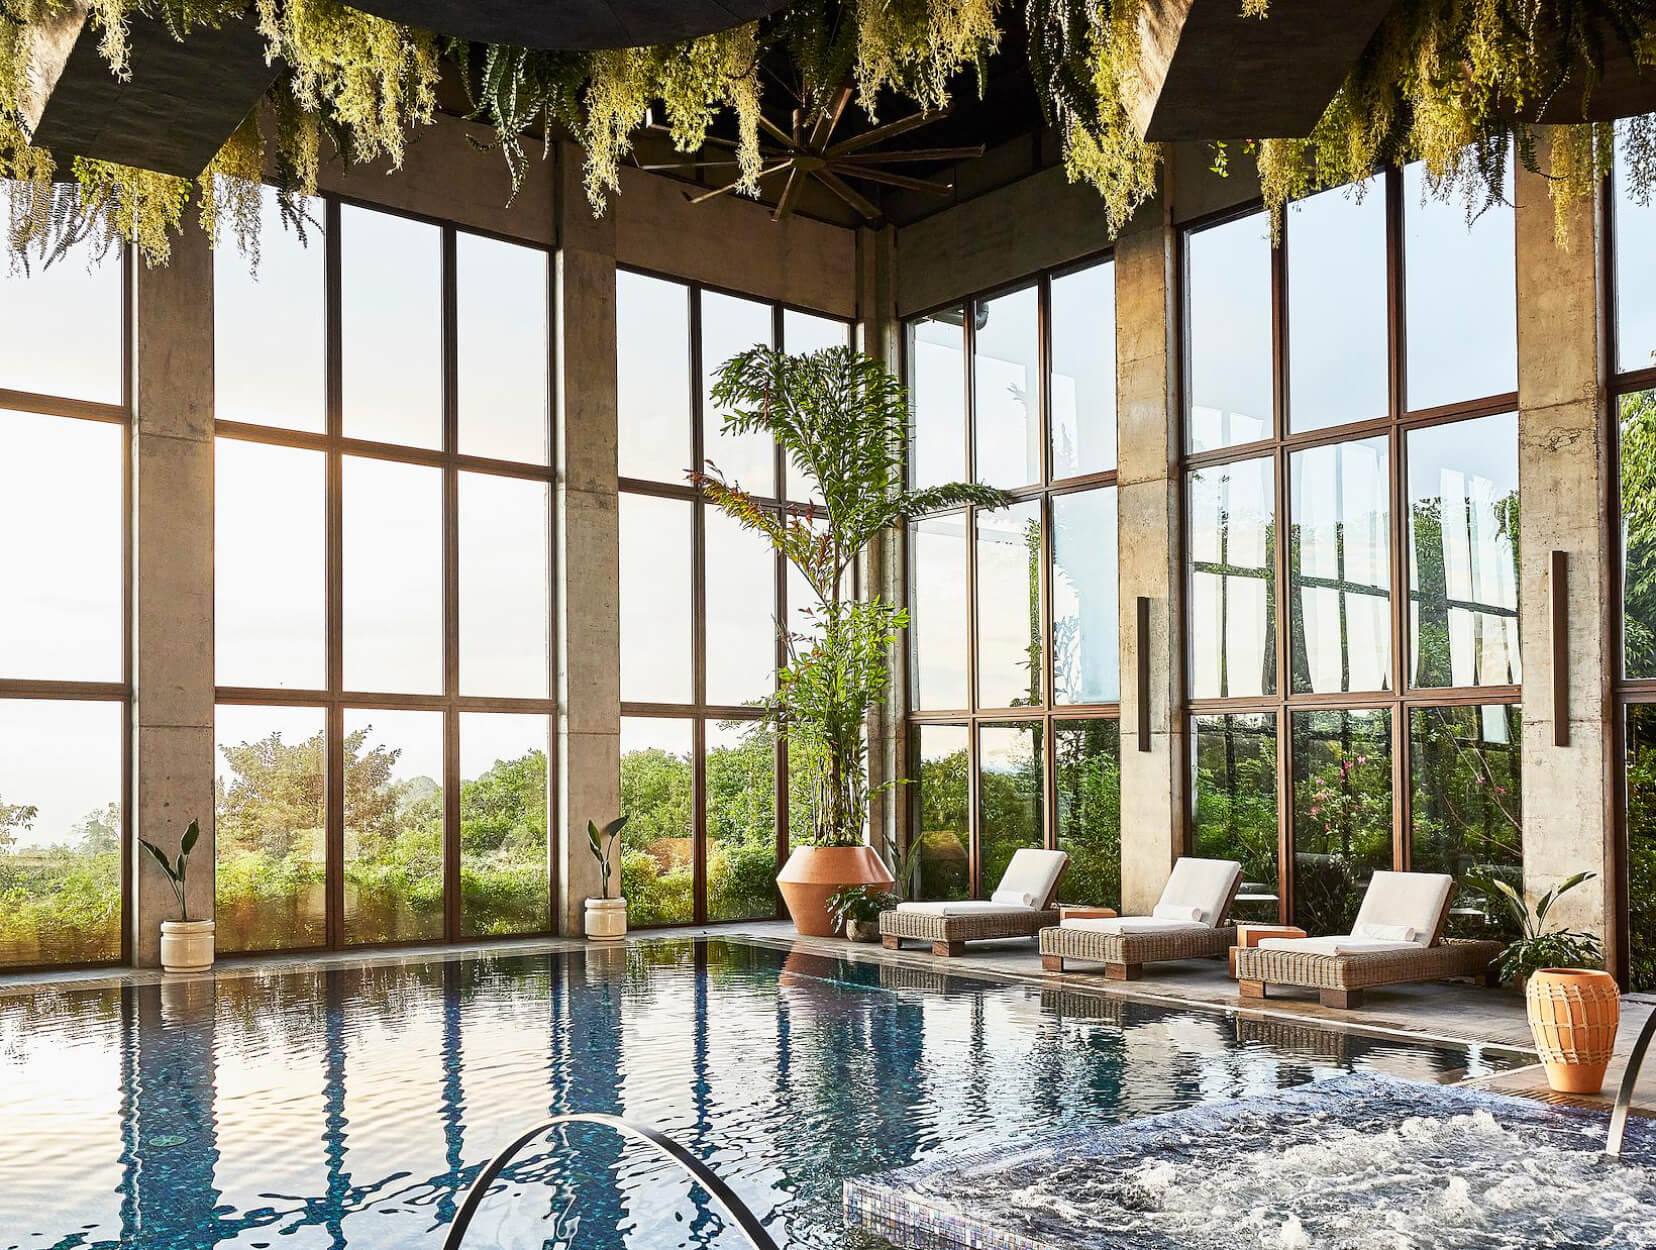 A Weekend Spa Trip within the Misty Costa Rican Mountains